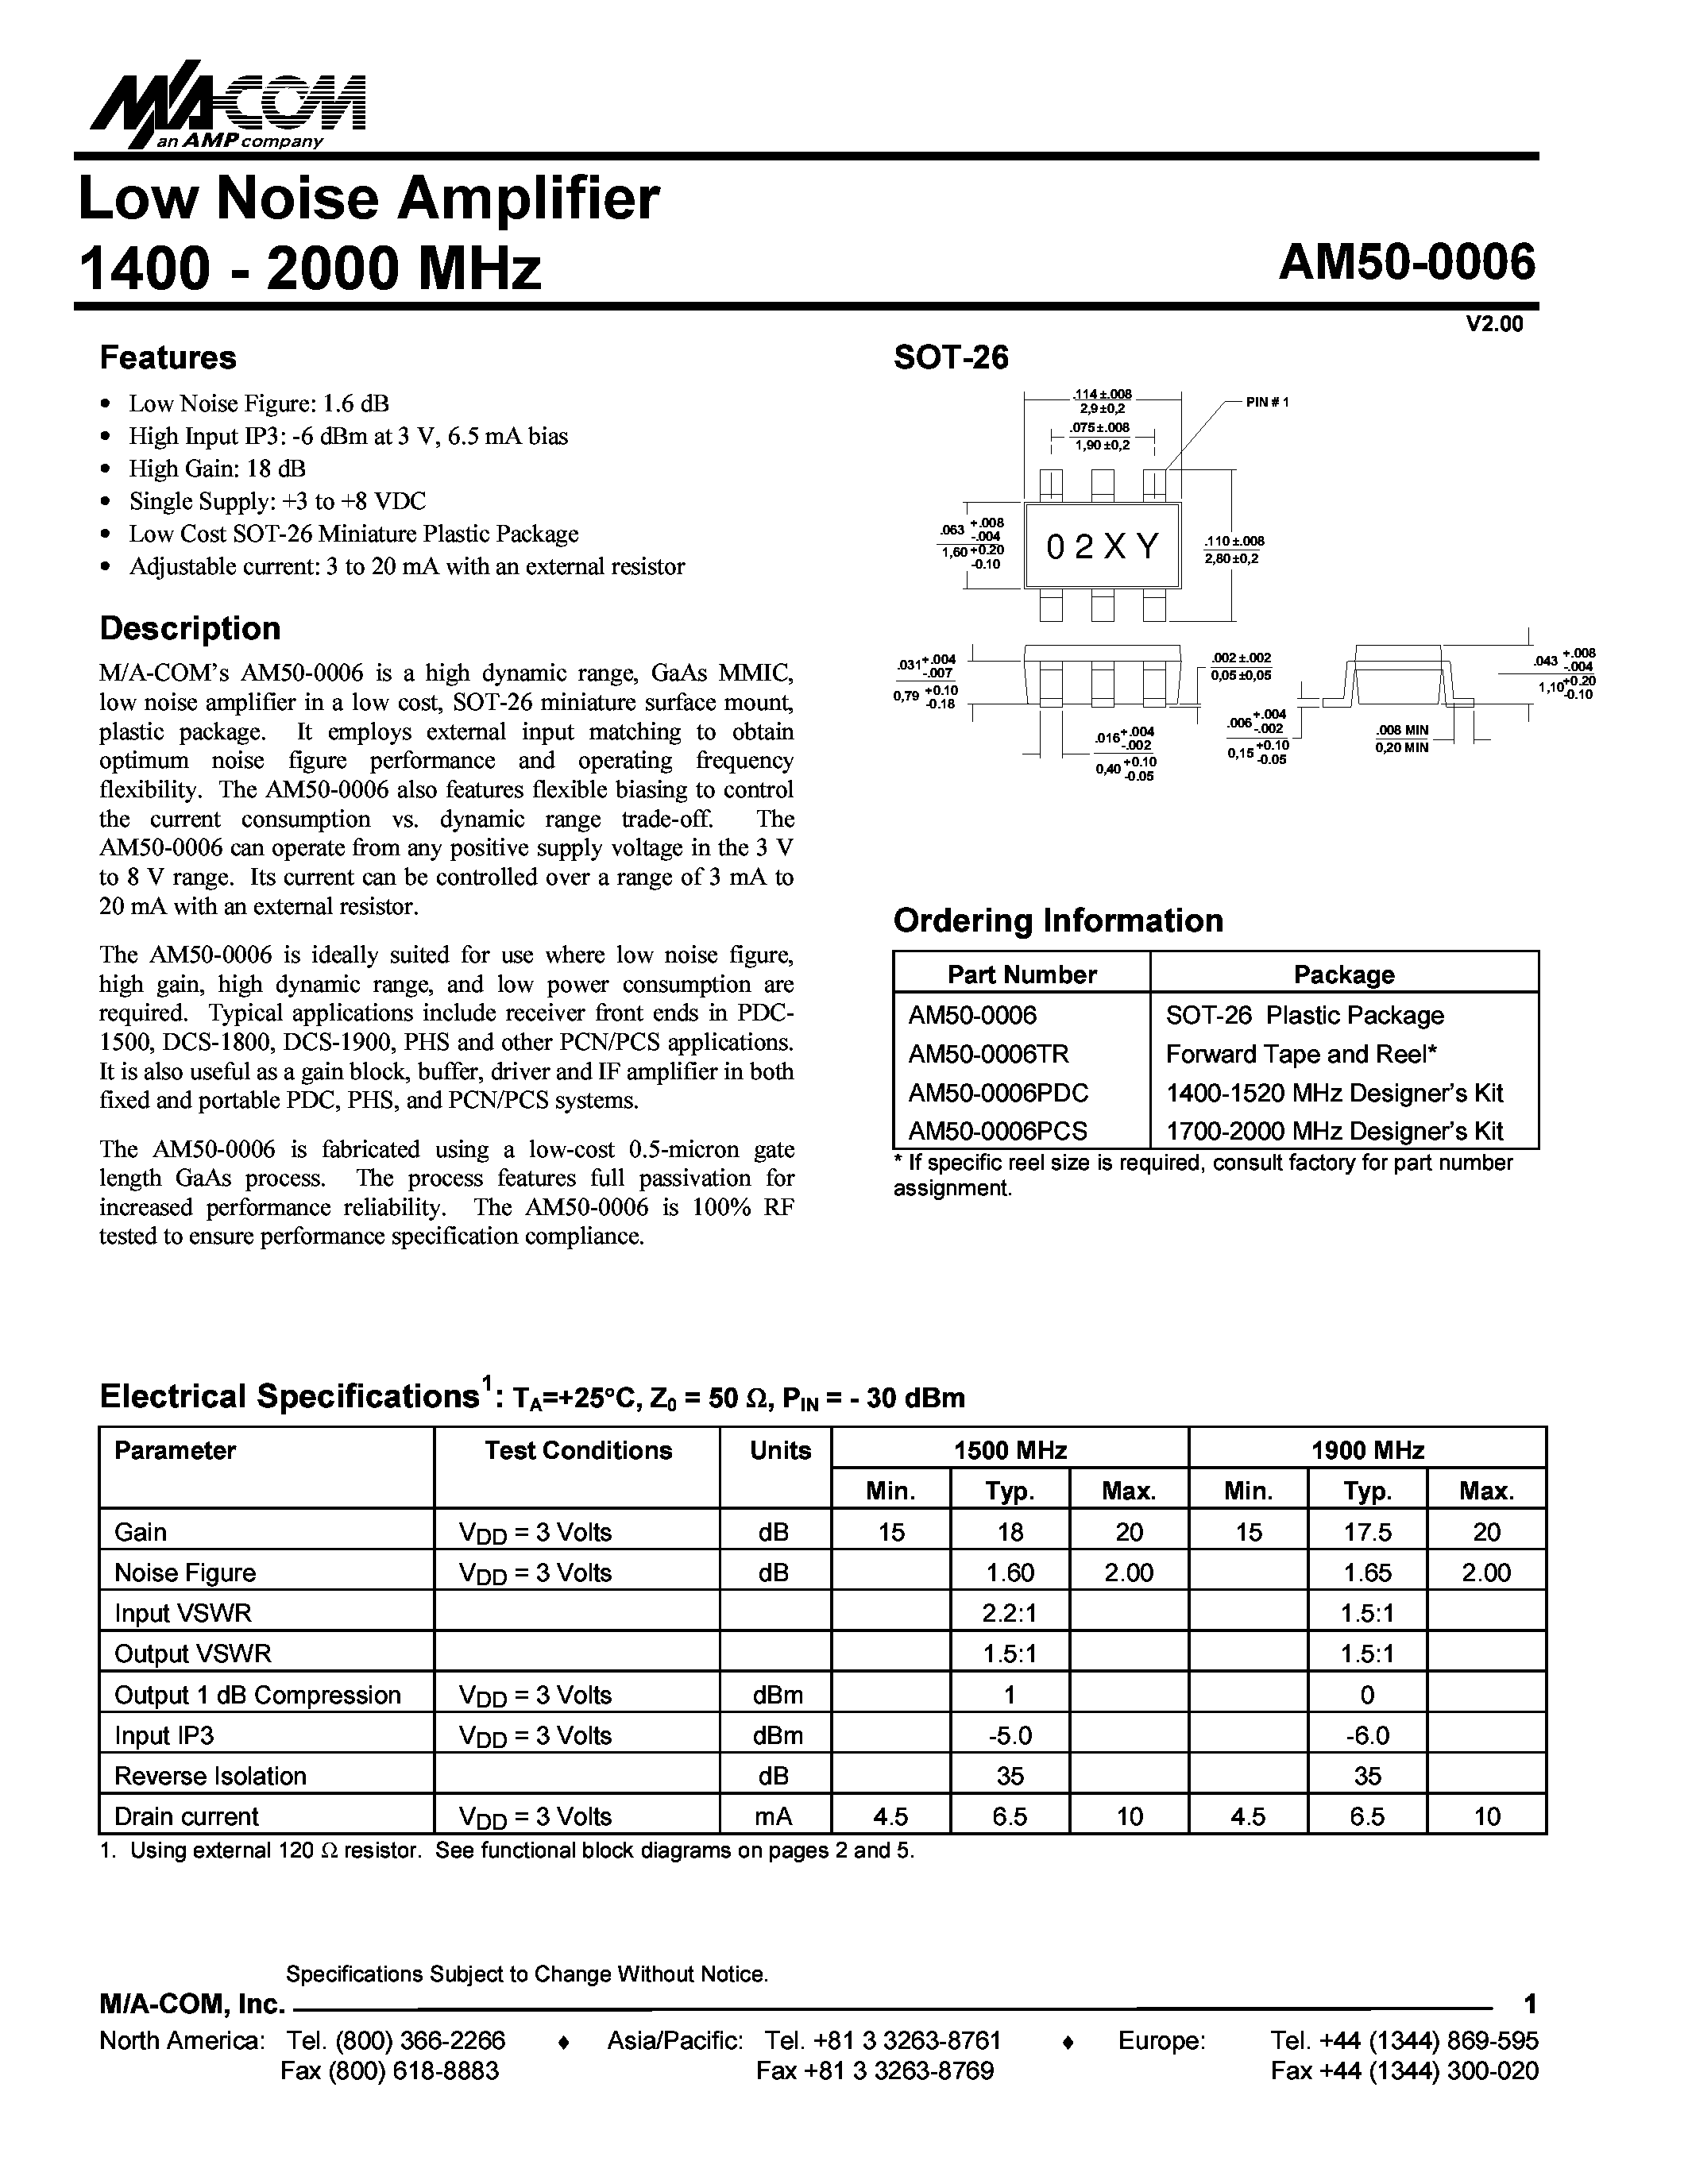 Datasheet AM50-0006PDC - Low Noise Amplifier 1400 - 2000 MHz page 1